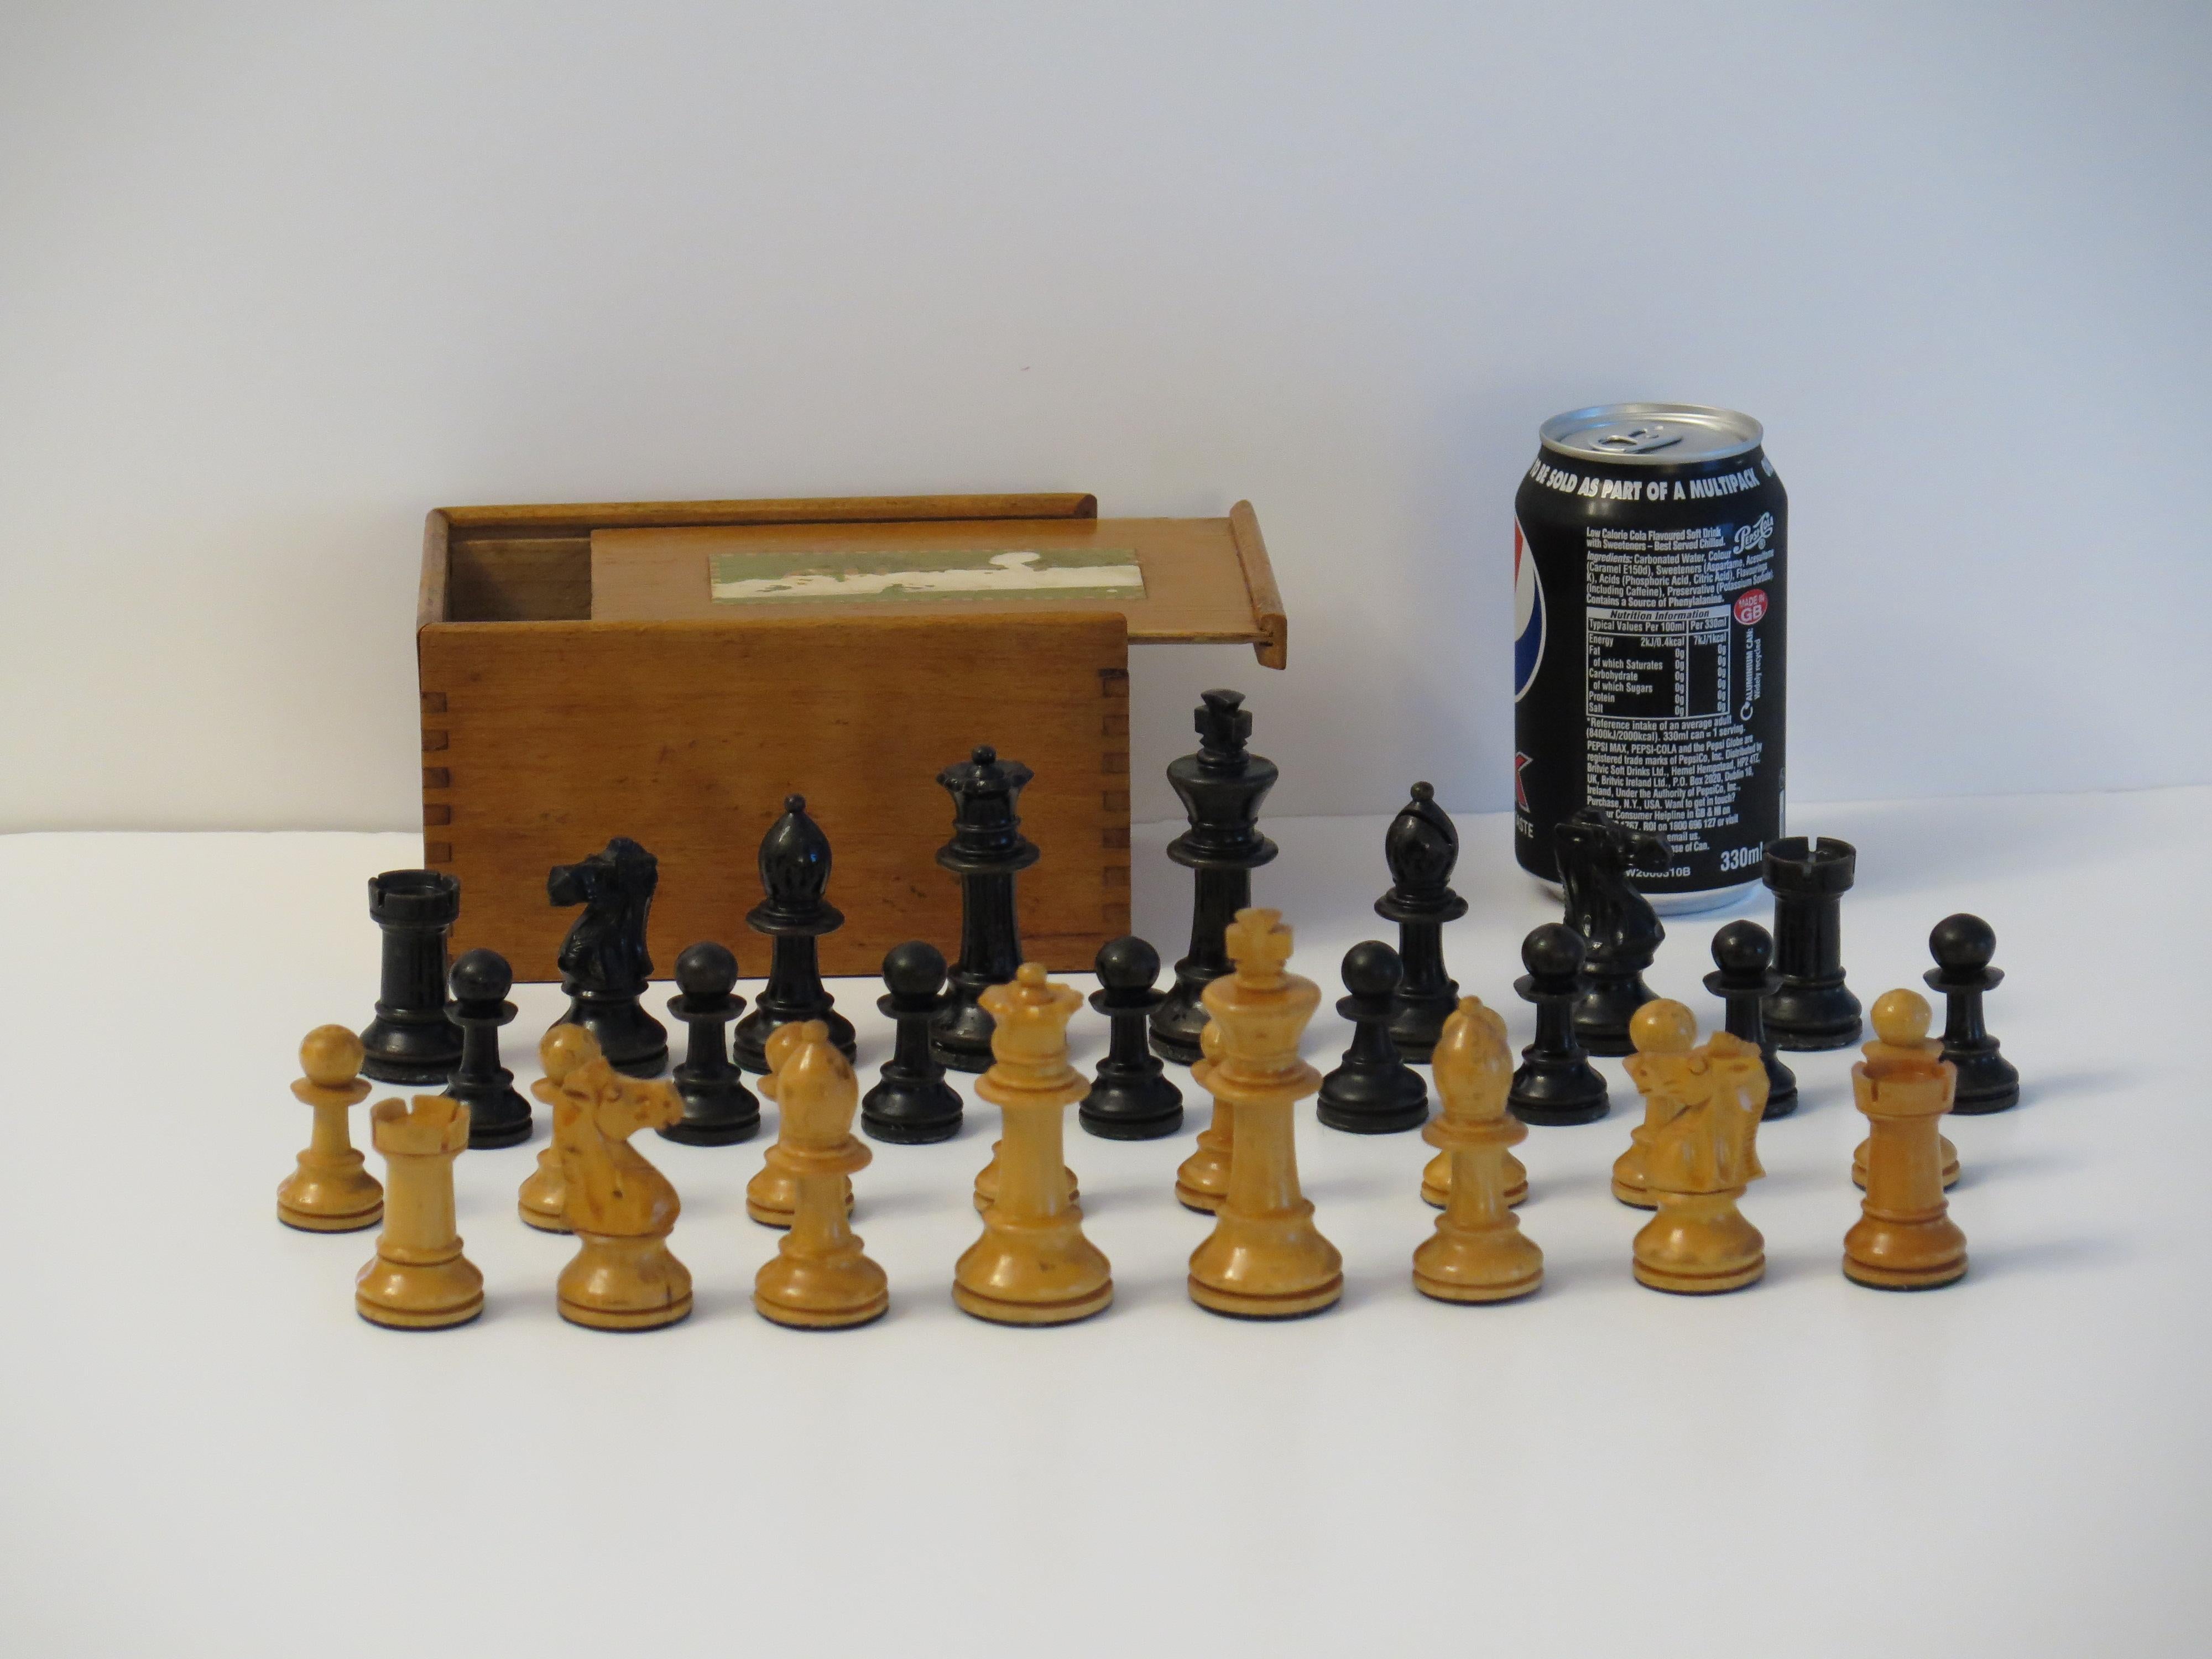 Staunton Fierce Knight Weighted Club Chesss Set 8.5cm Kings Jointed Box, 19th C en vente 7